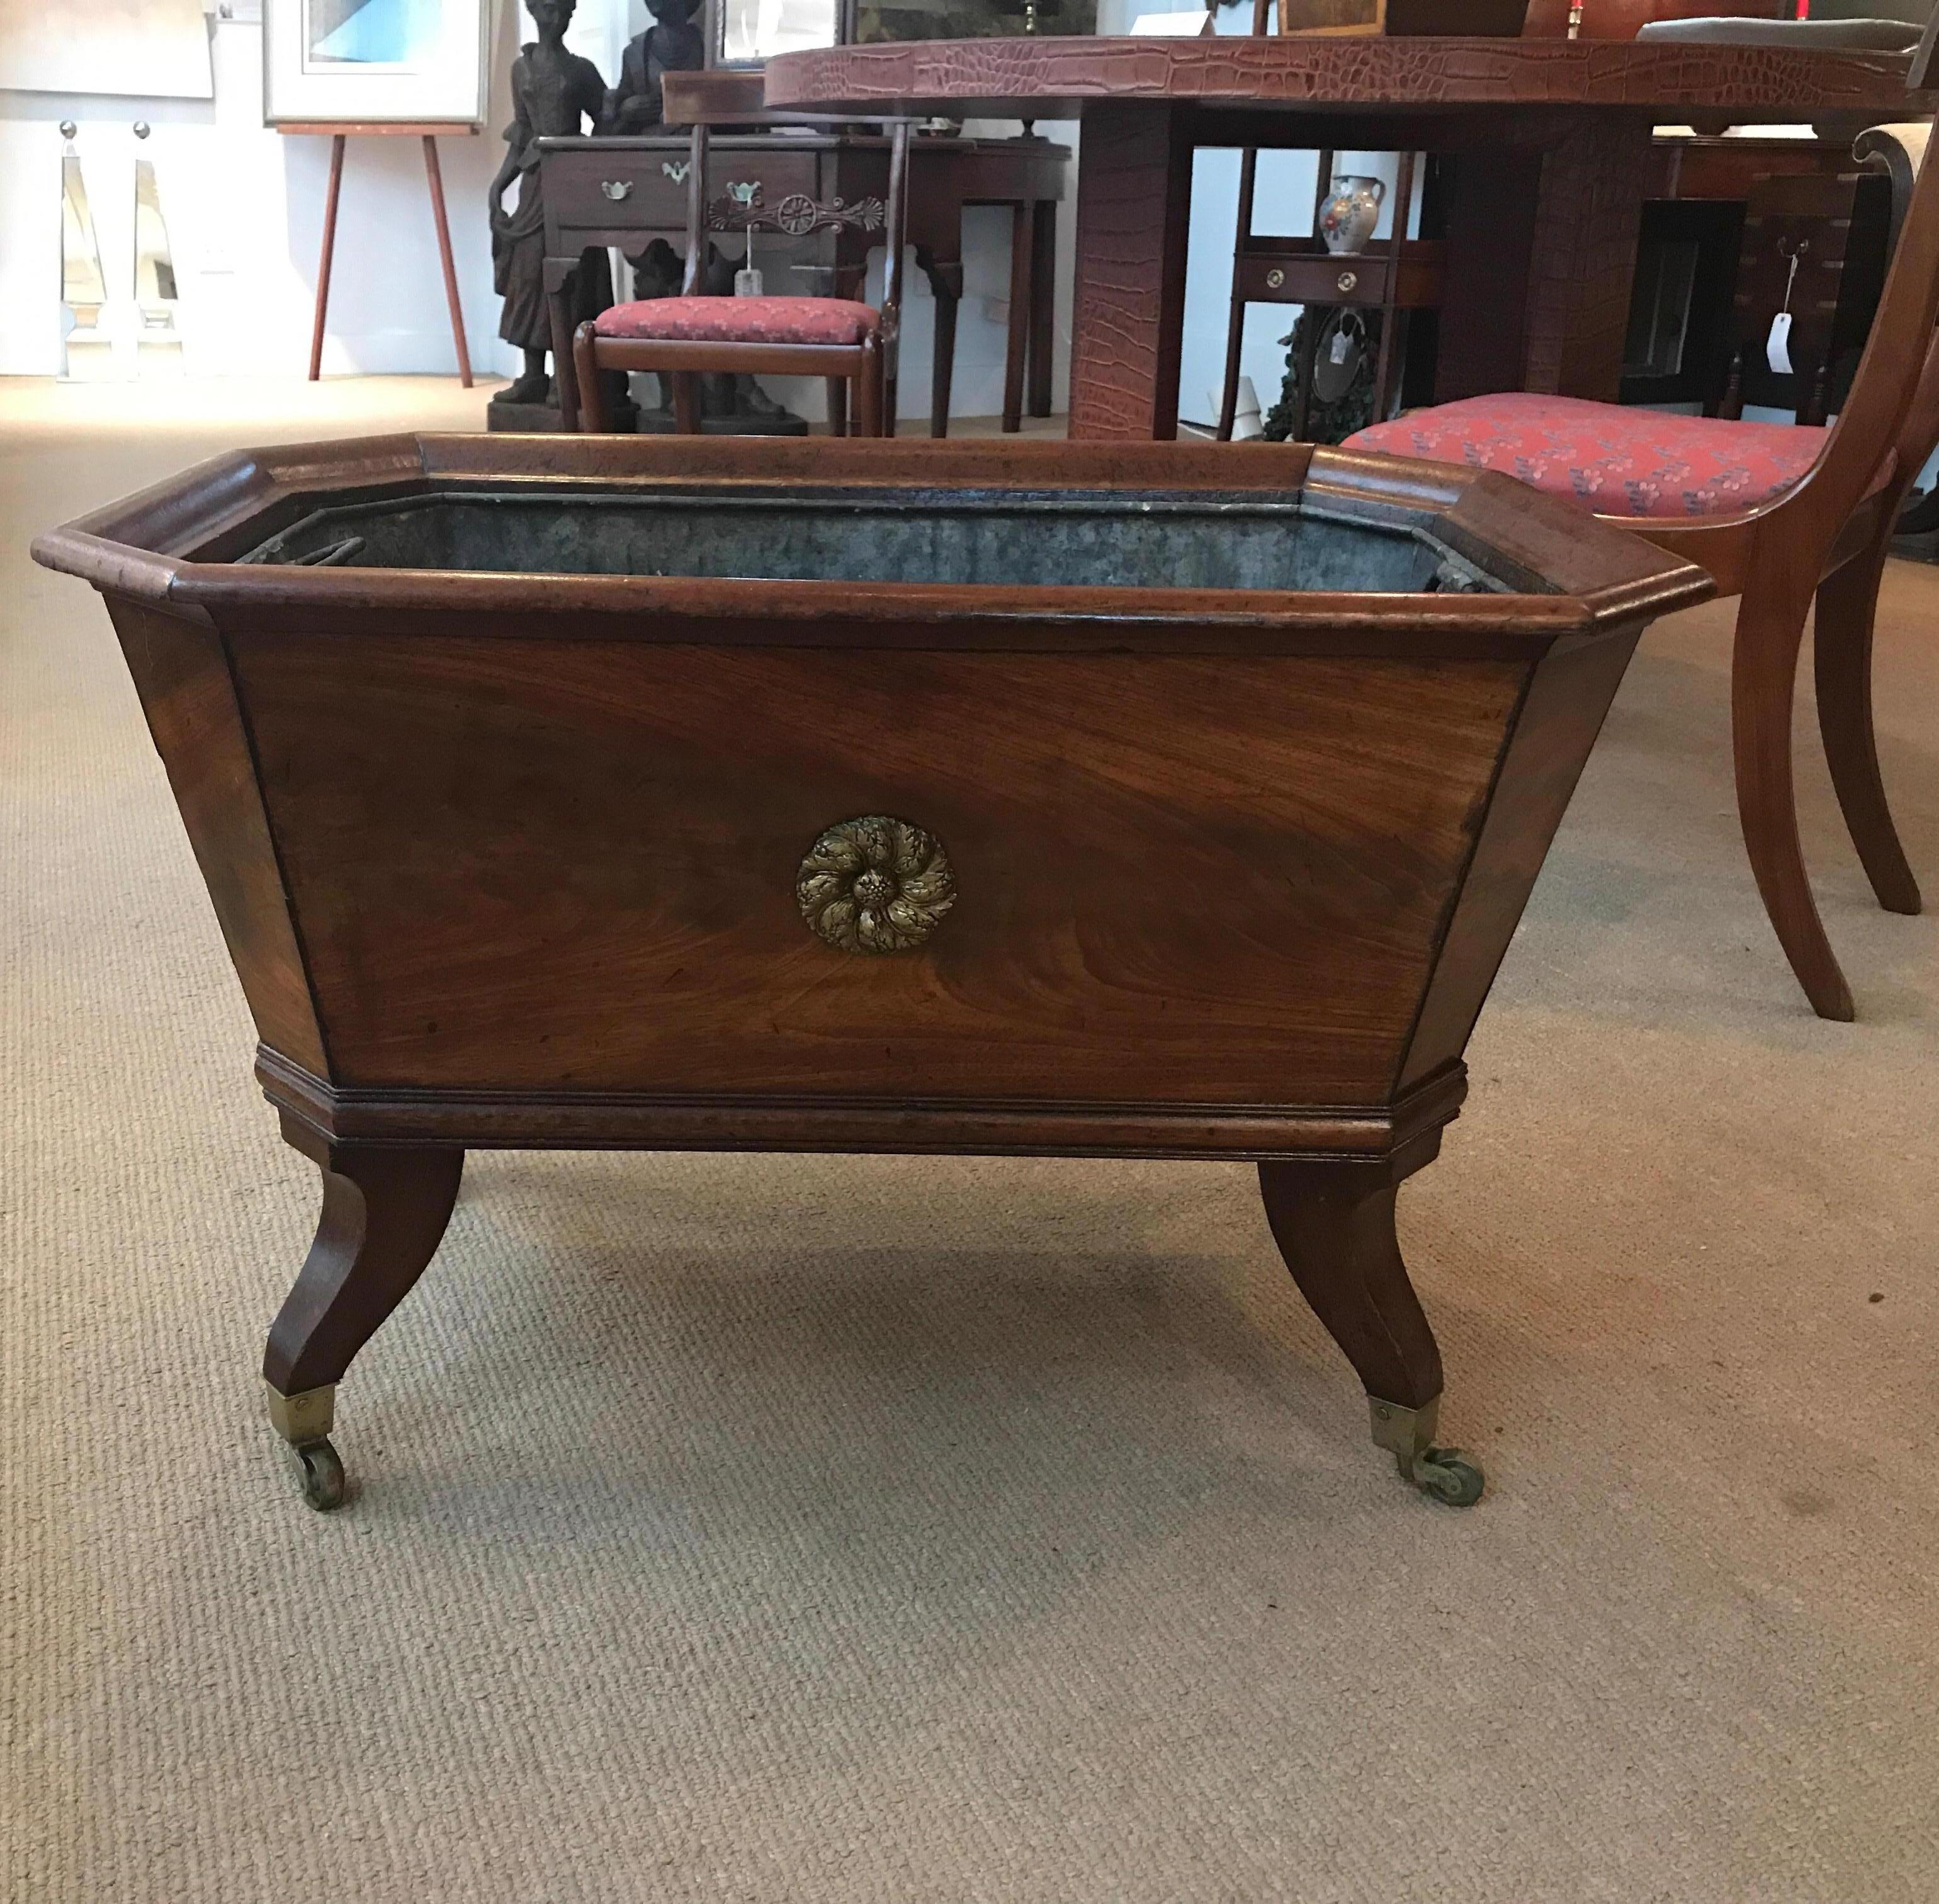 Unusual English Regency mahogany plant stand with original liner and original brass mounts, circa 1820. Can also be used as a cellarette.